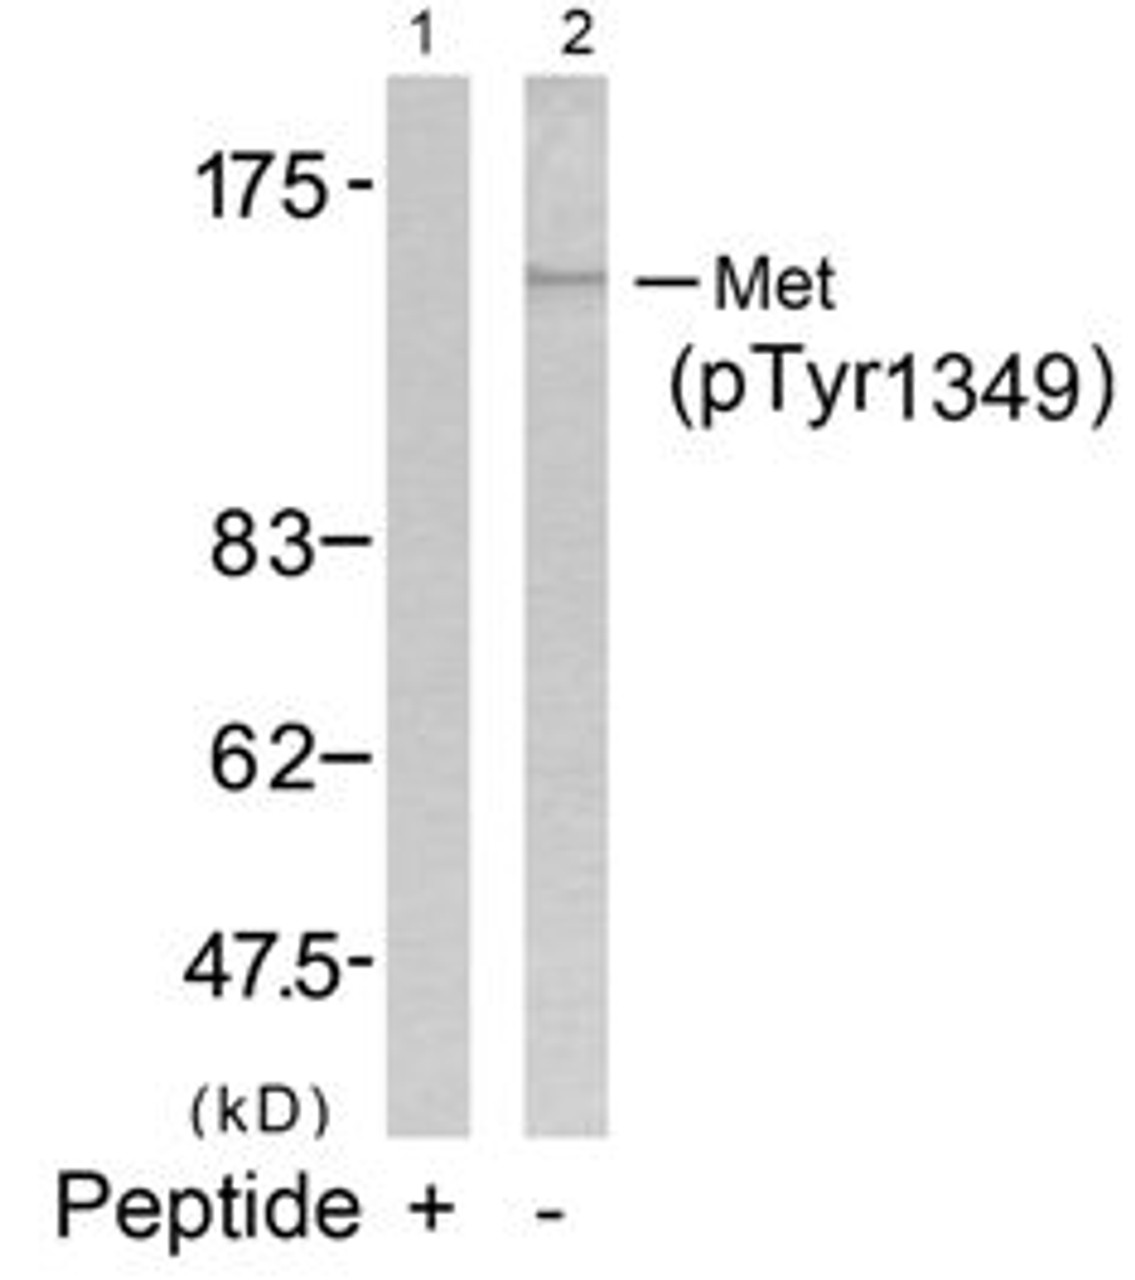 Western blot analysis of lysed extracts from HepG2 cells using Met (Phospho-Tyr1349) .